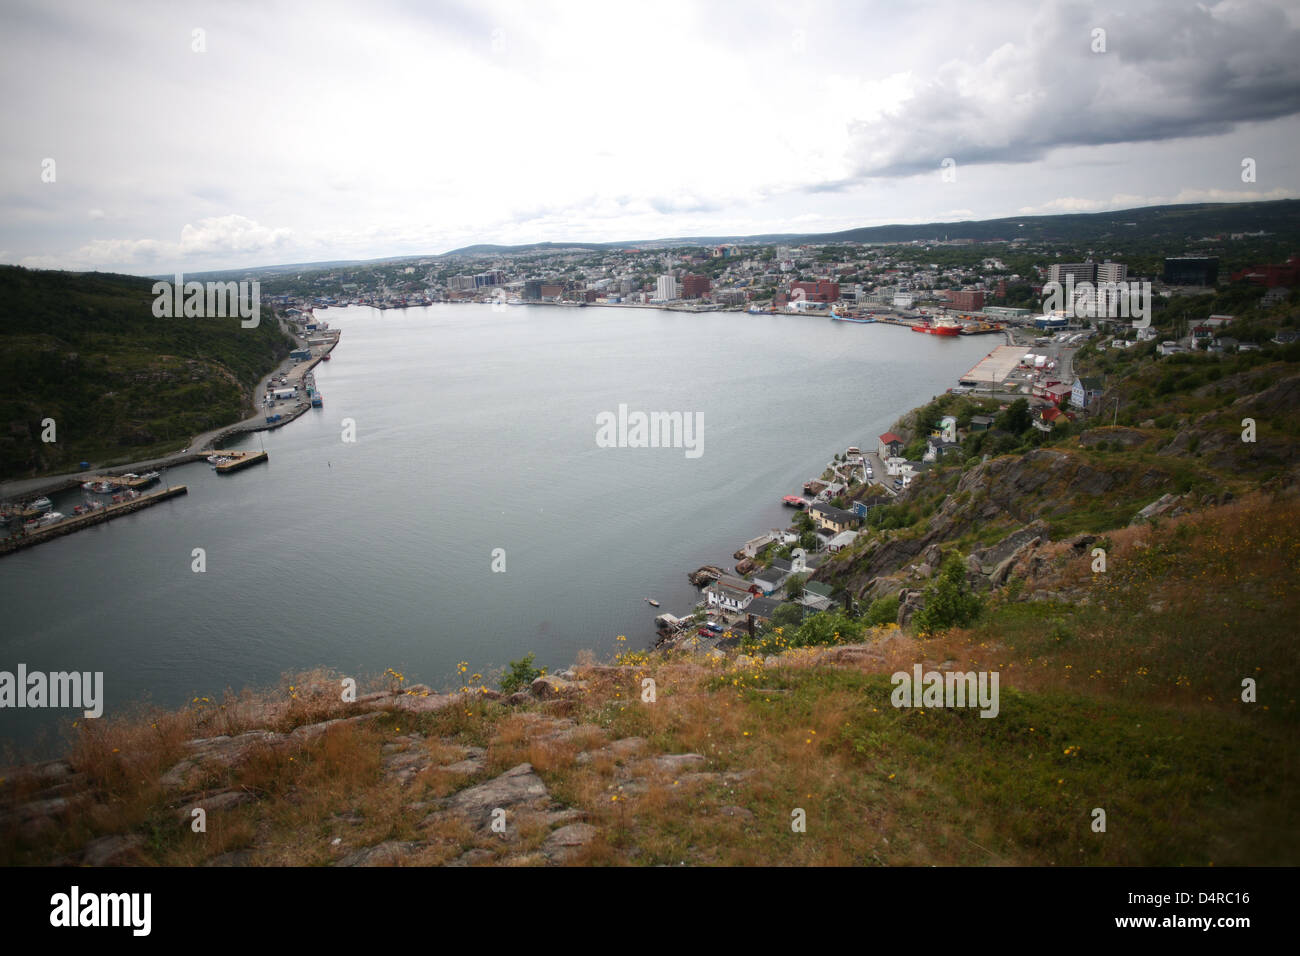 An elevated view of St John's from SIgnal Hill in Newfoundland. The Canadian Press Images/Lee Brown Stock Photo